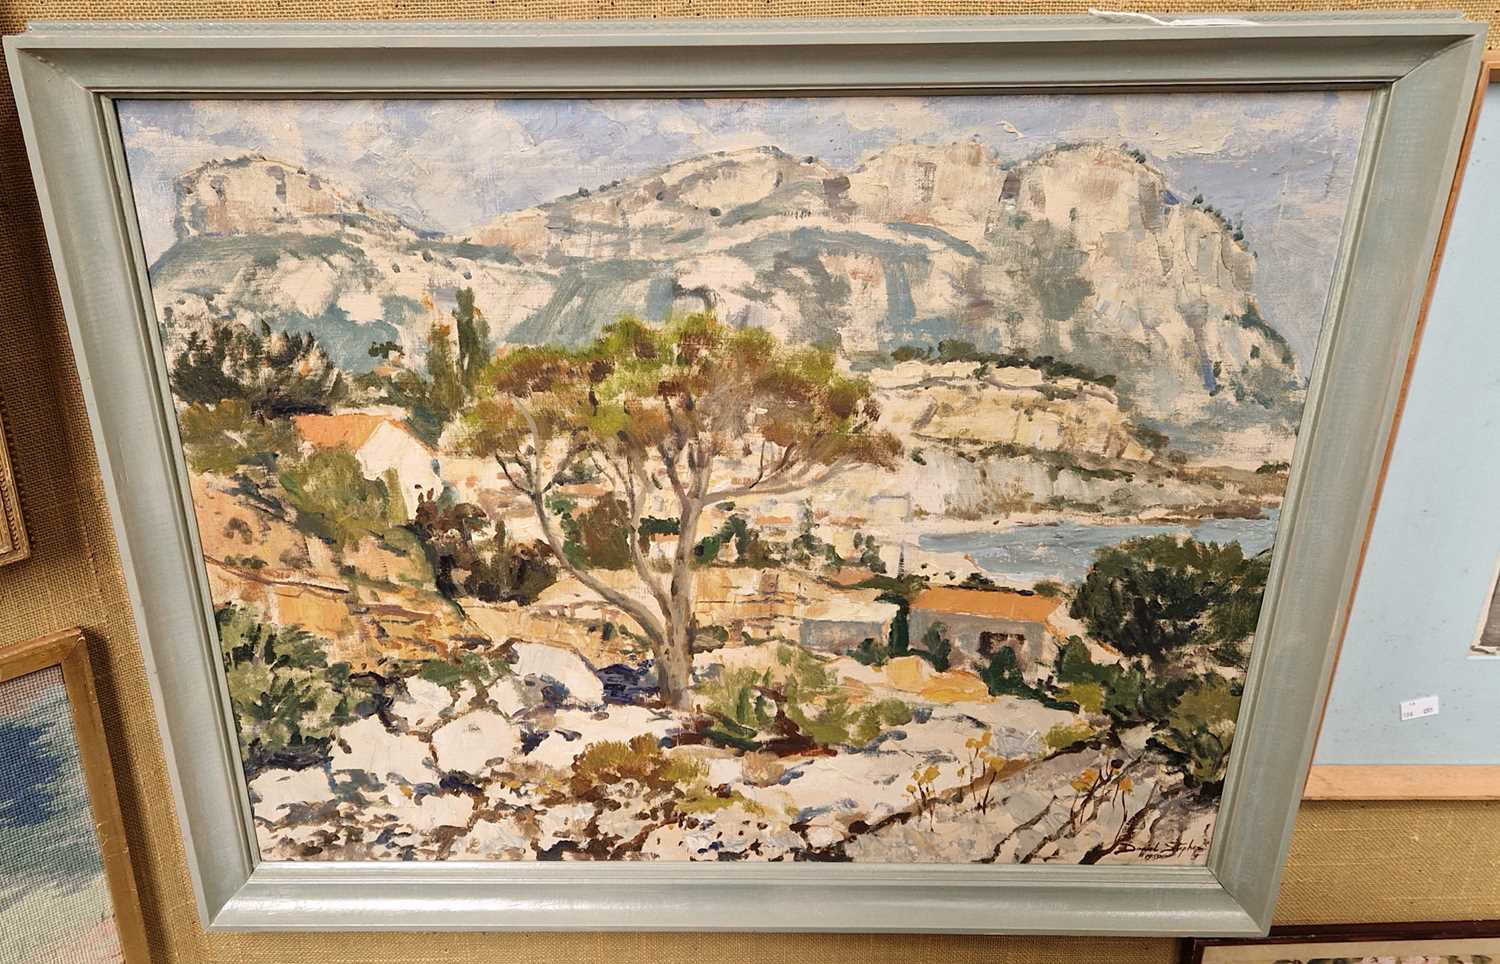 ARR Daniel Stephen (b.1921) Landscape, South of France oil on canvas, signed and dated 1959 lower